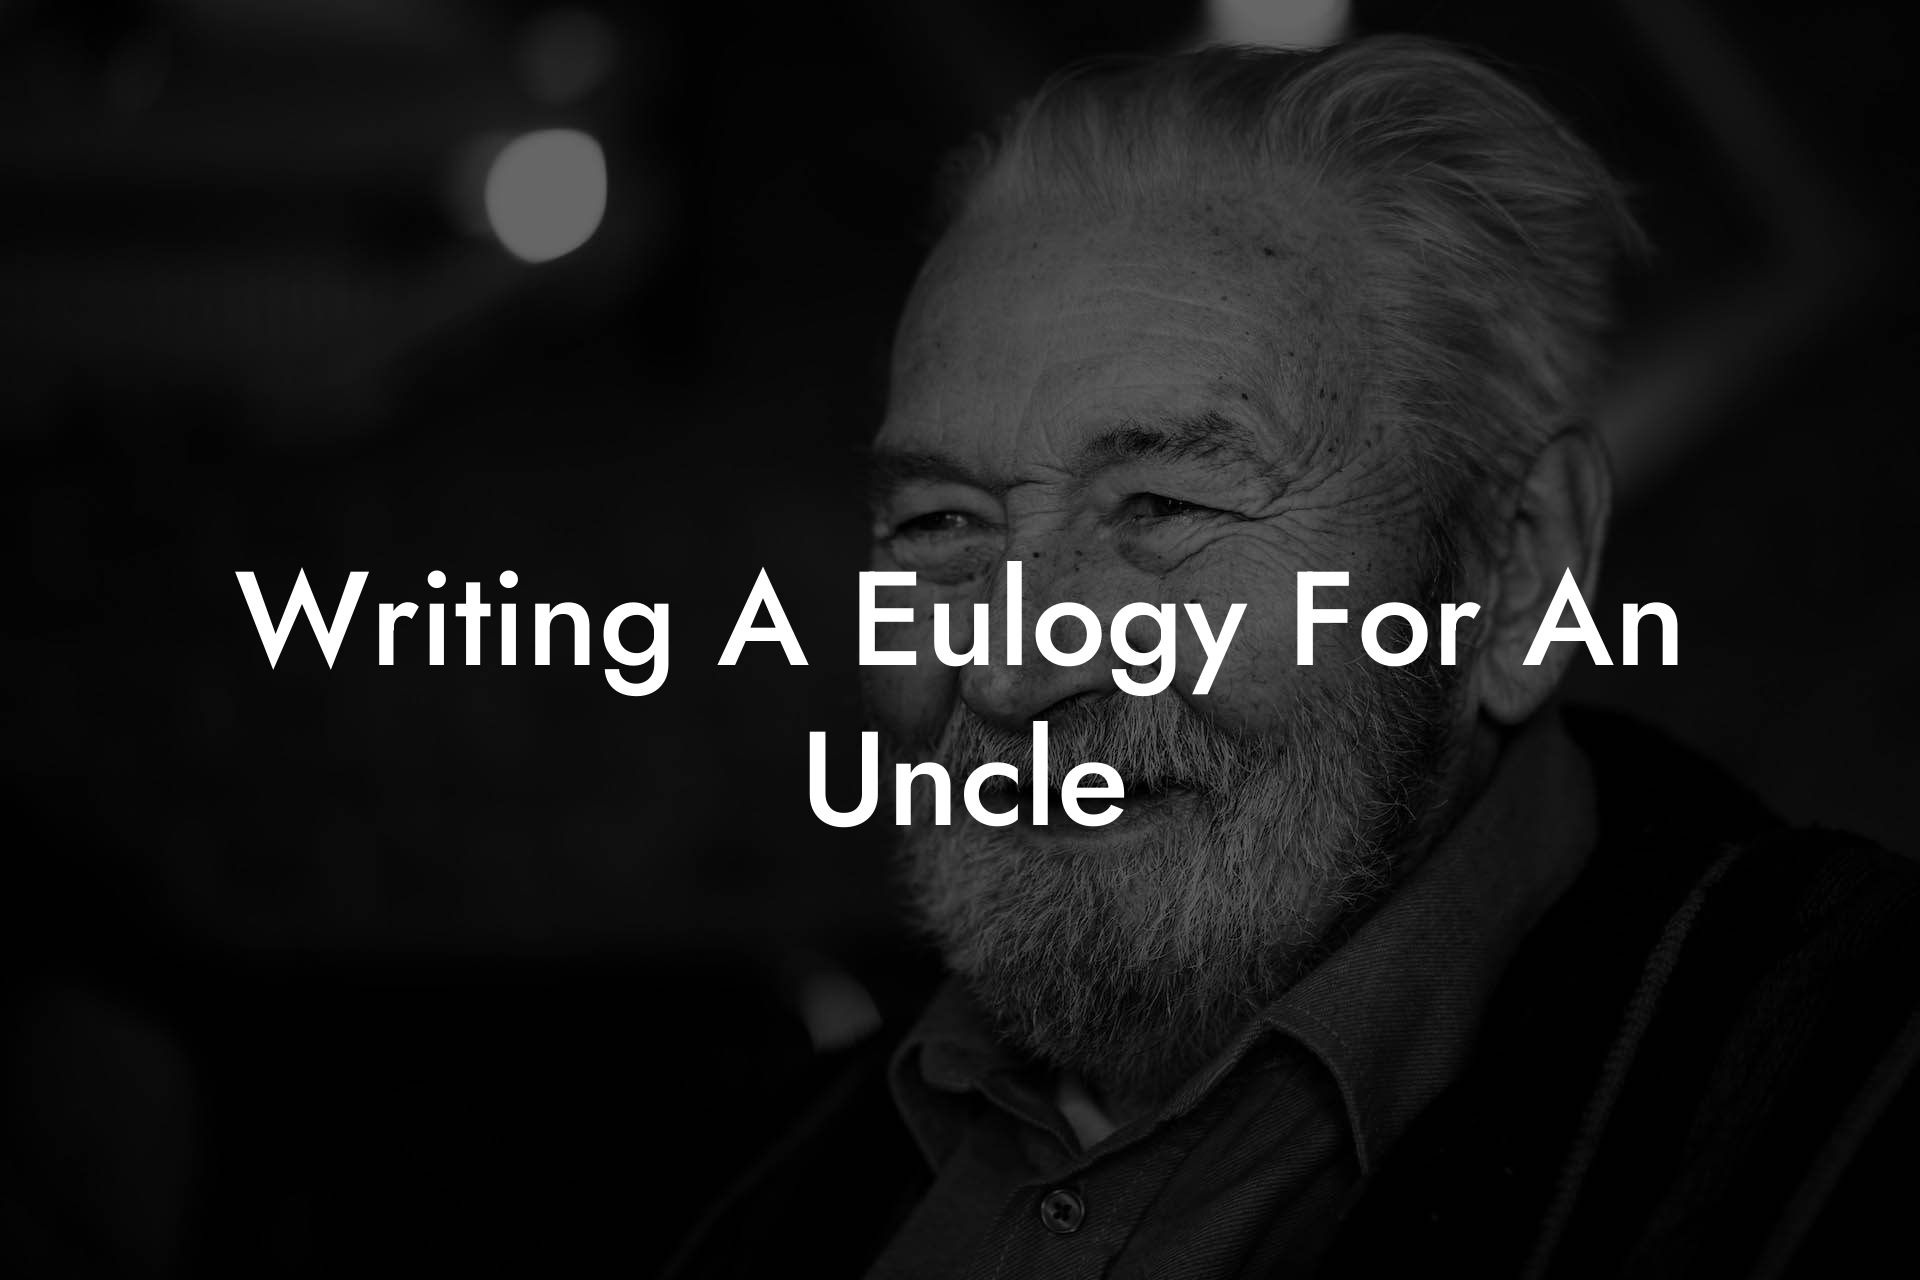 Writing A Eulogy For An Uncle